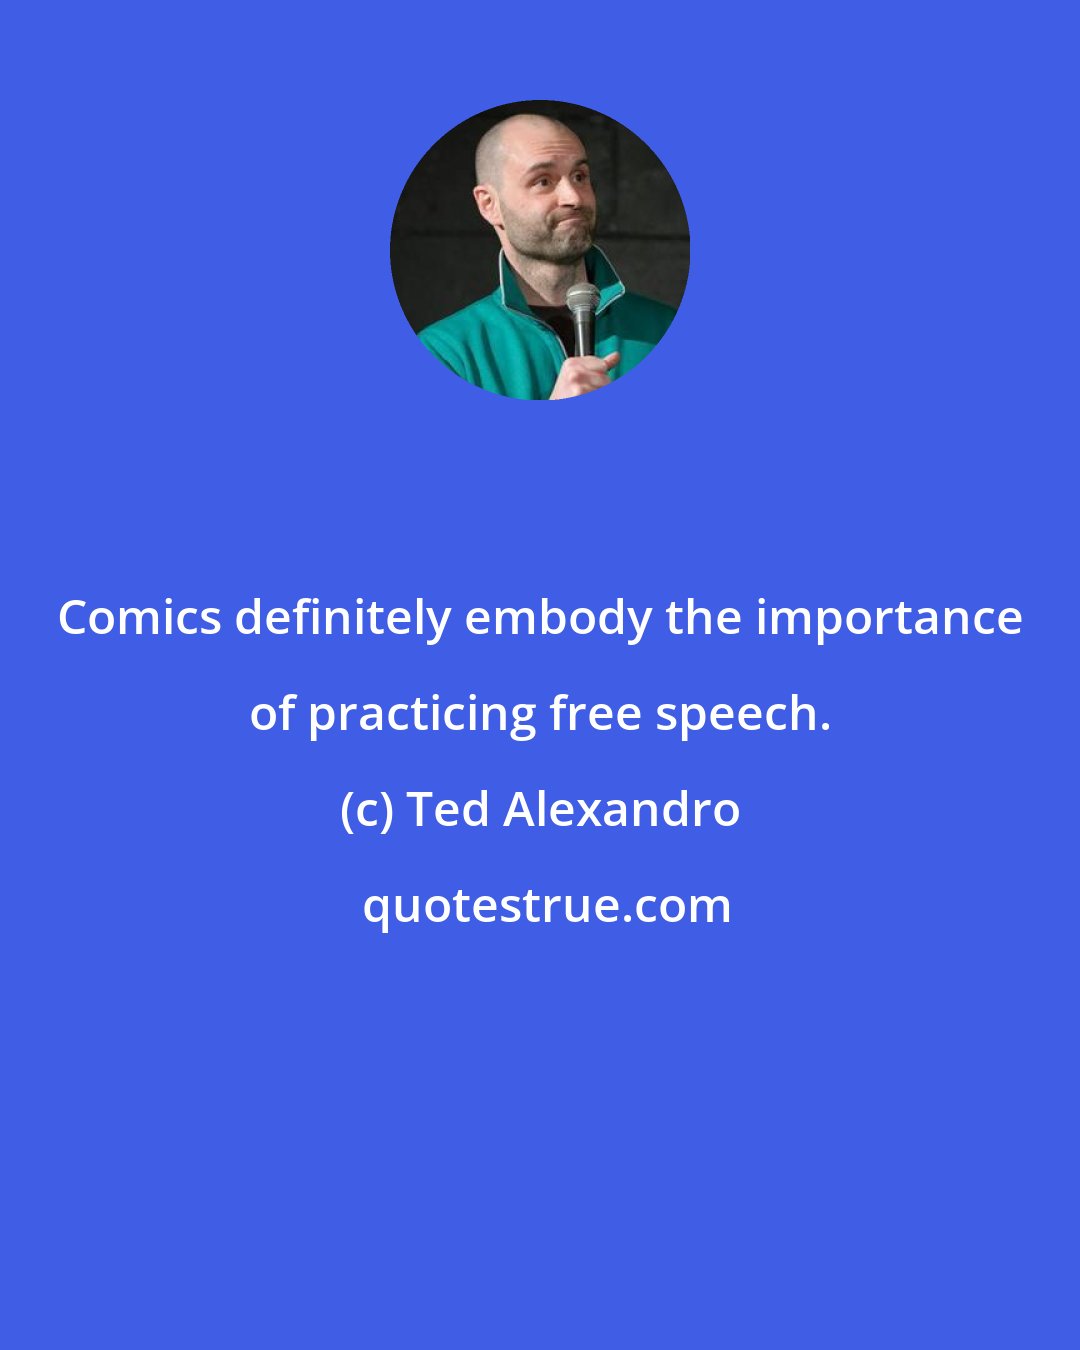 Ted Alexandro: Comics definitely embody the importance of practicing free speech.